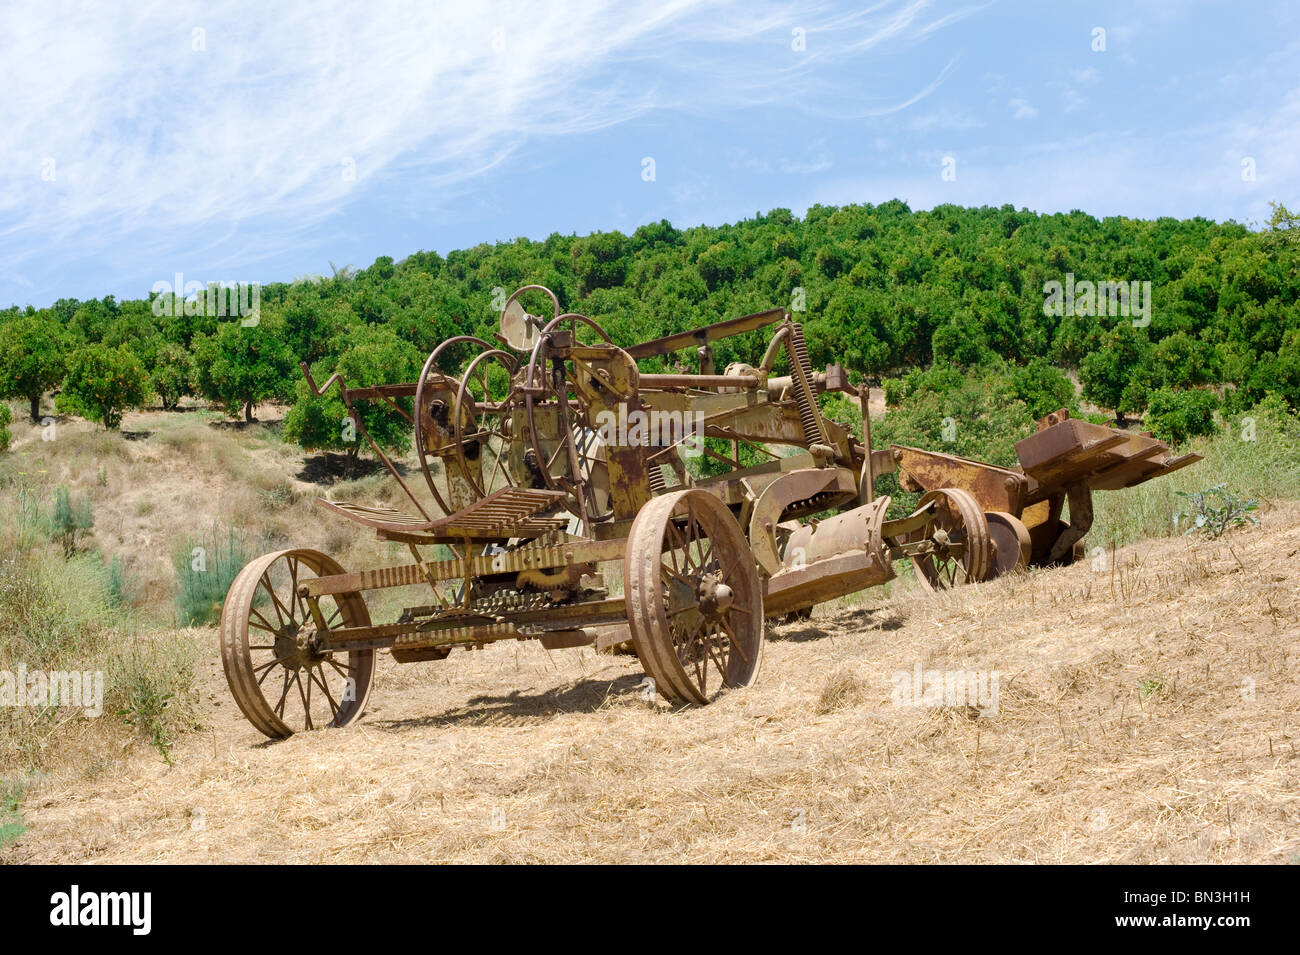 Old farming equipment in a remote field including a tractor and a hoe. Stock Photo